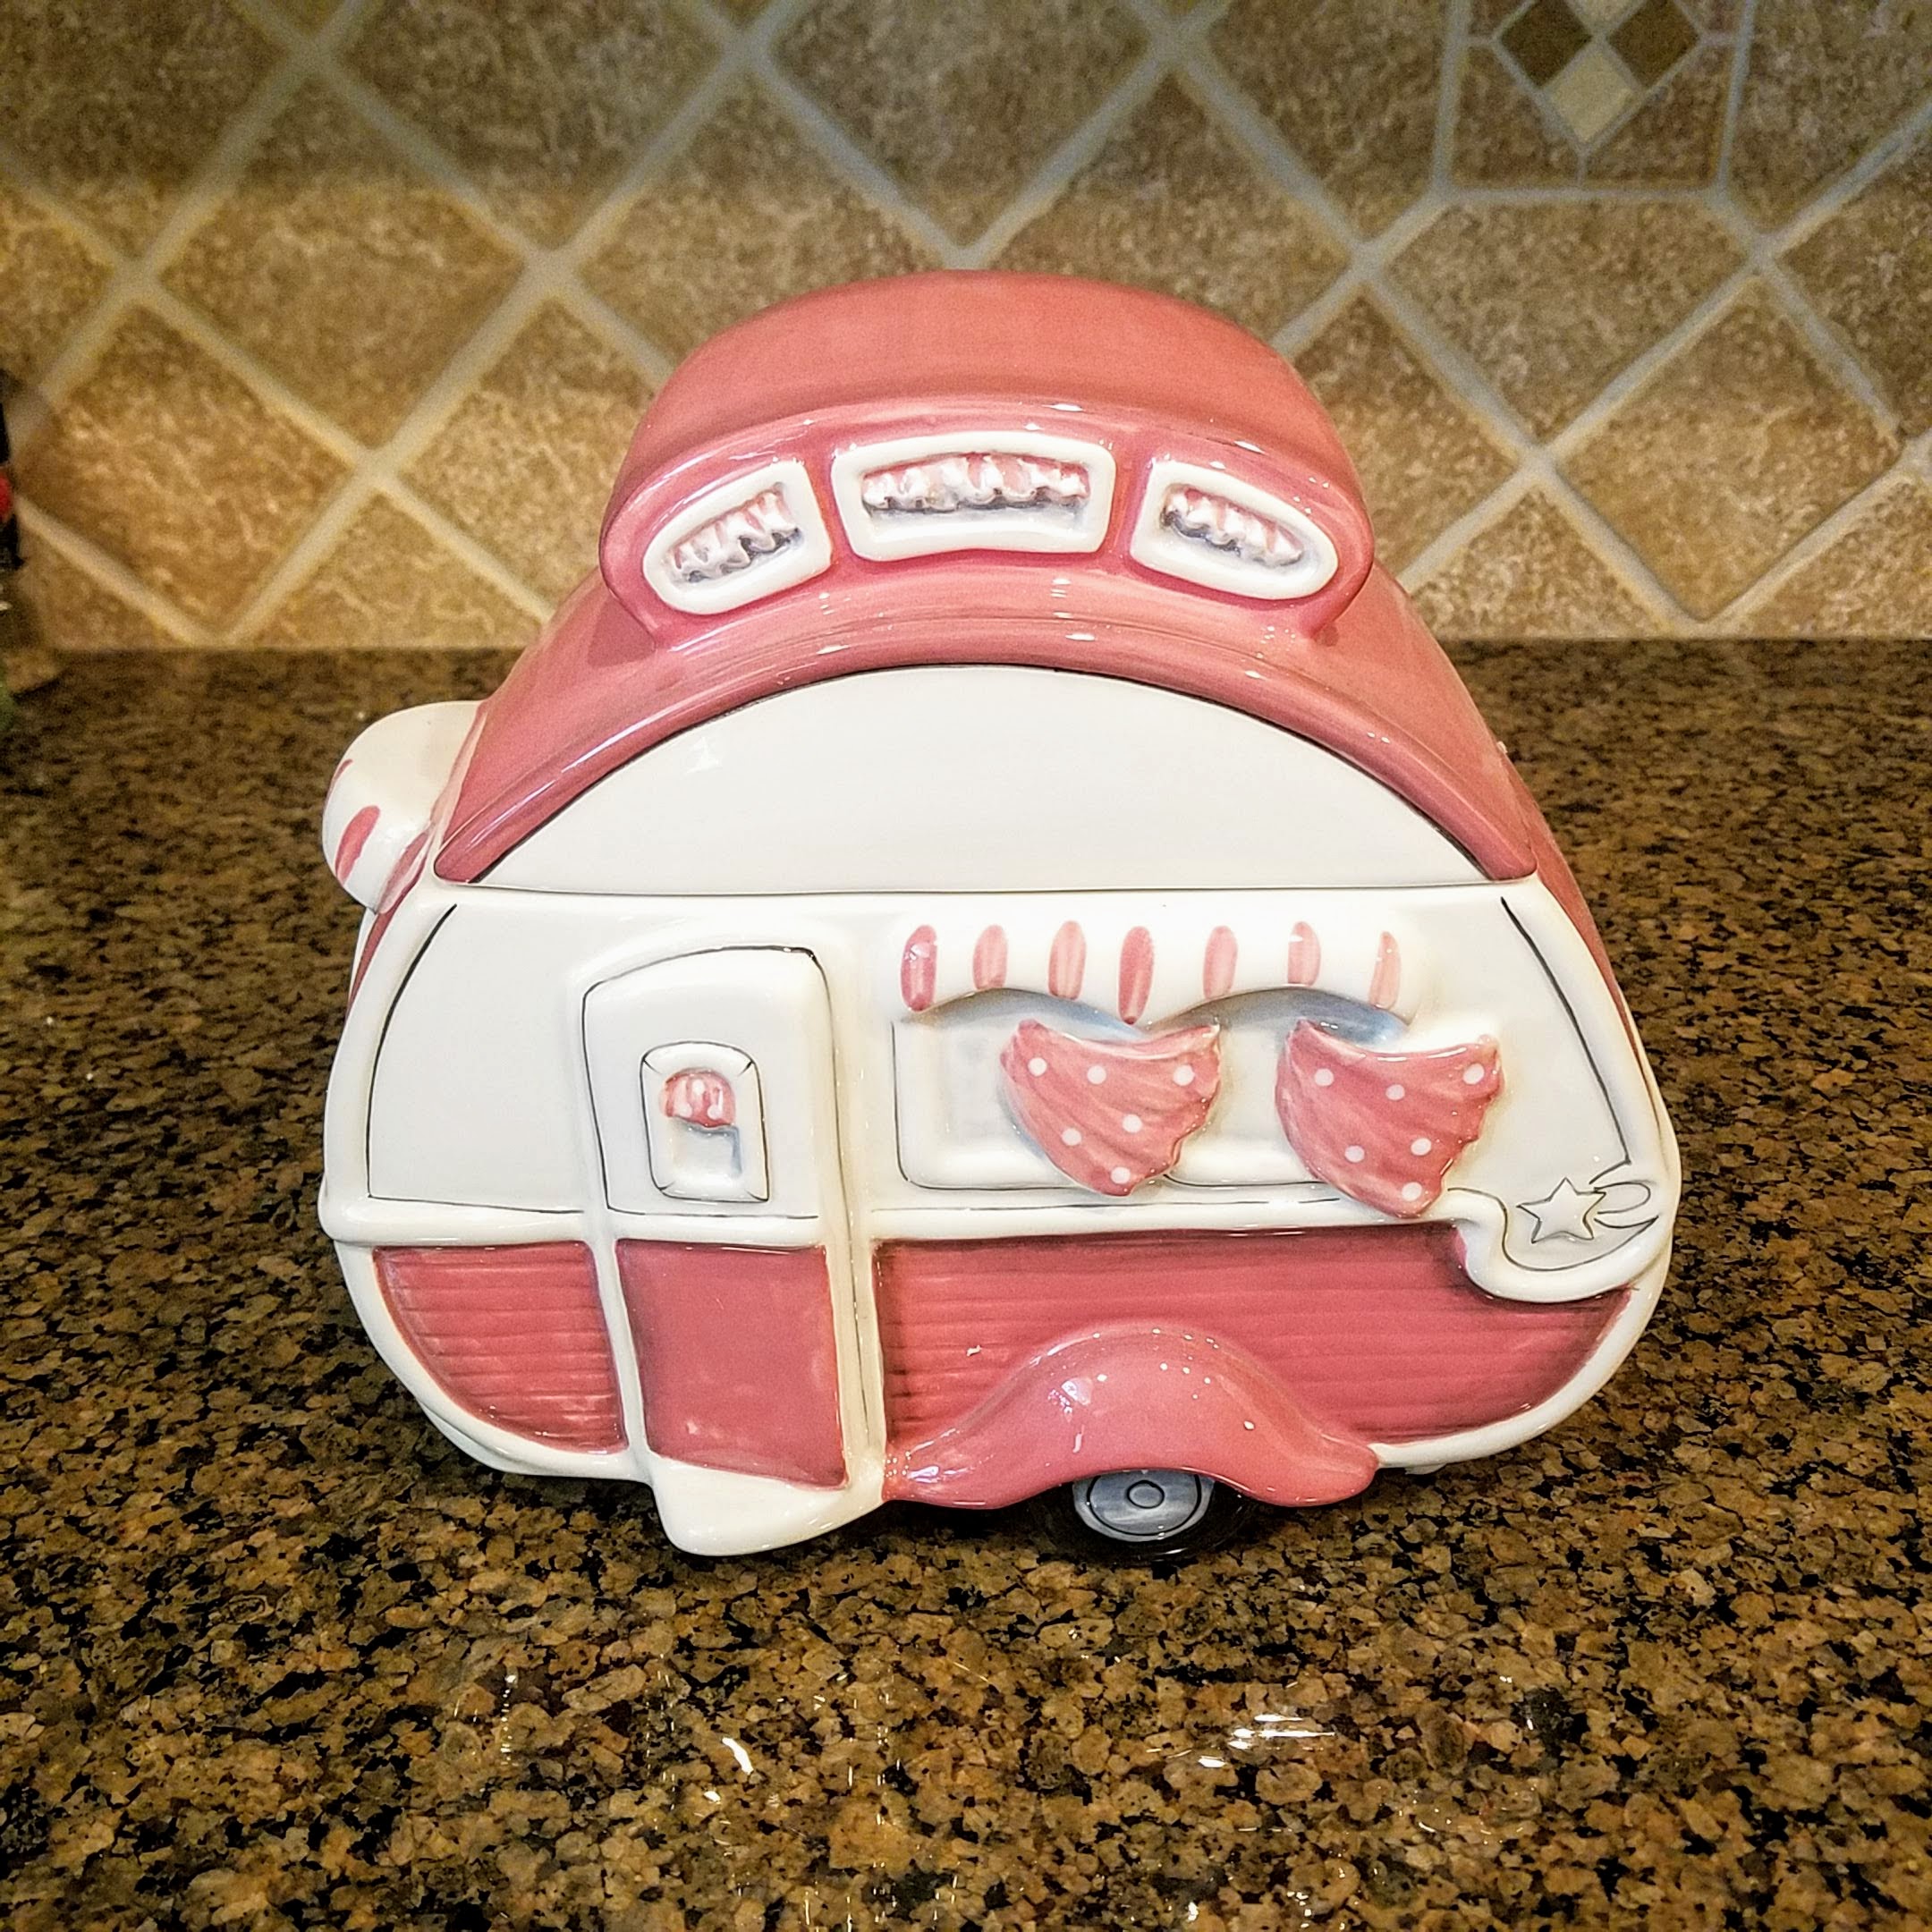 This Retro Camper Cookie Jar Pink Ceramic Blue Sky Heather Goldminc Kitchen Decor is made with love by Premier Homegoods! Shop more unique gift ideas today with Spots Initiatives, the best way to support creators.